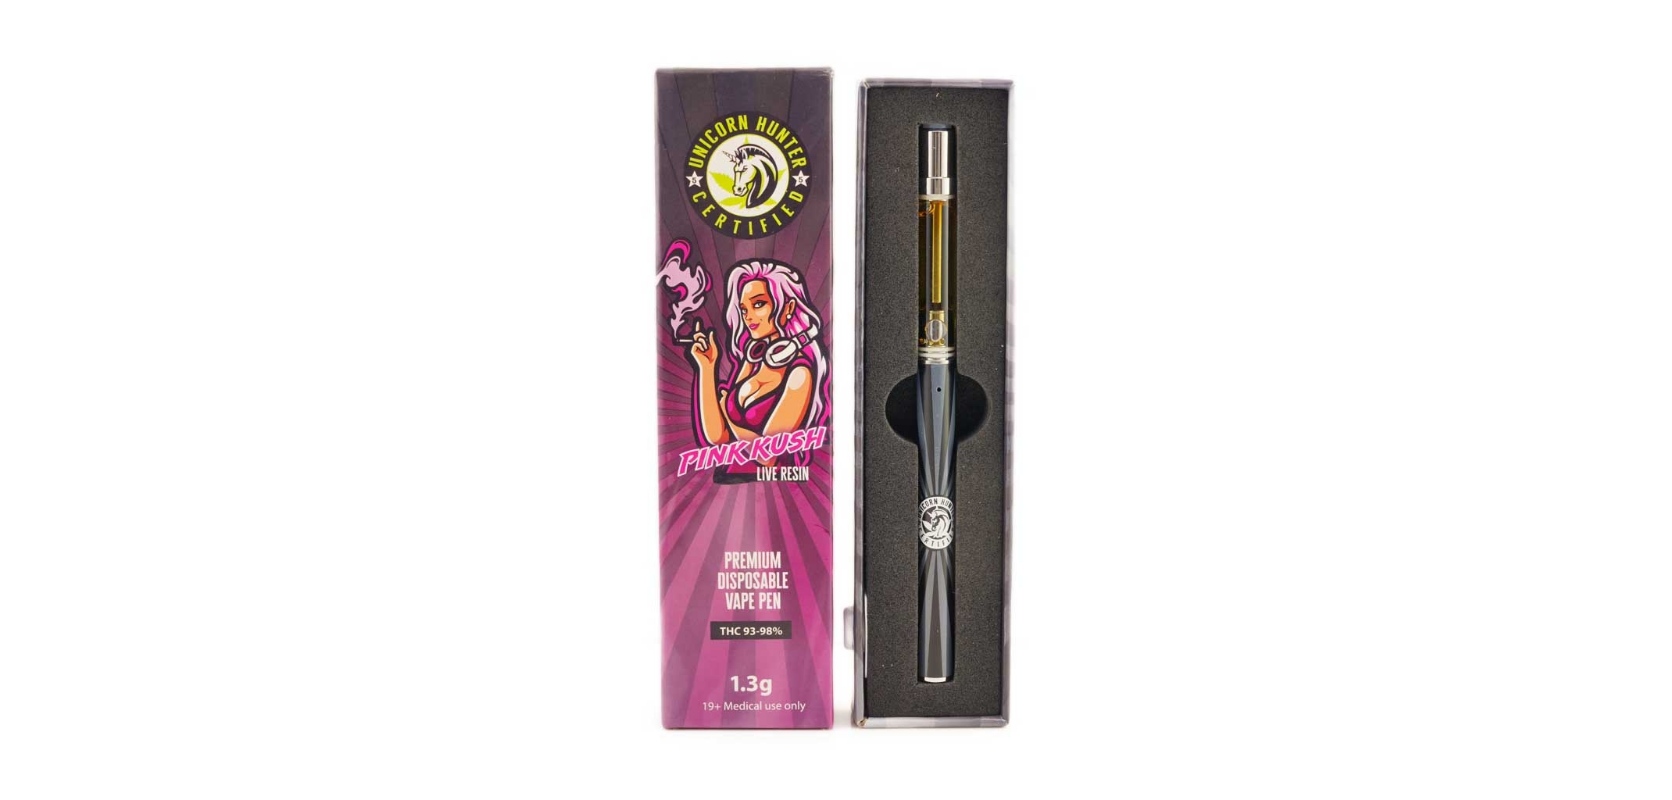 Are you a big fan of vaping? If so, get the Unicorn Hunter Concentrates - Pink Kush Live Resin Disposable Pen today. 